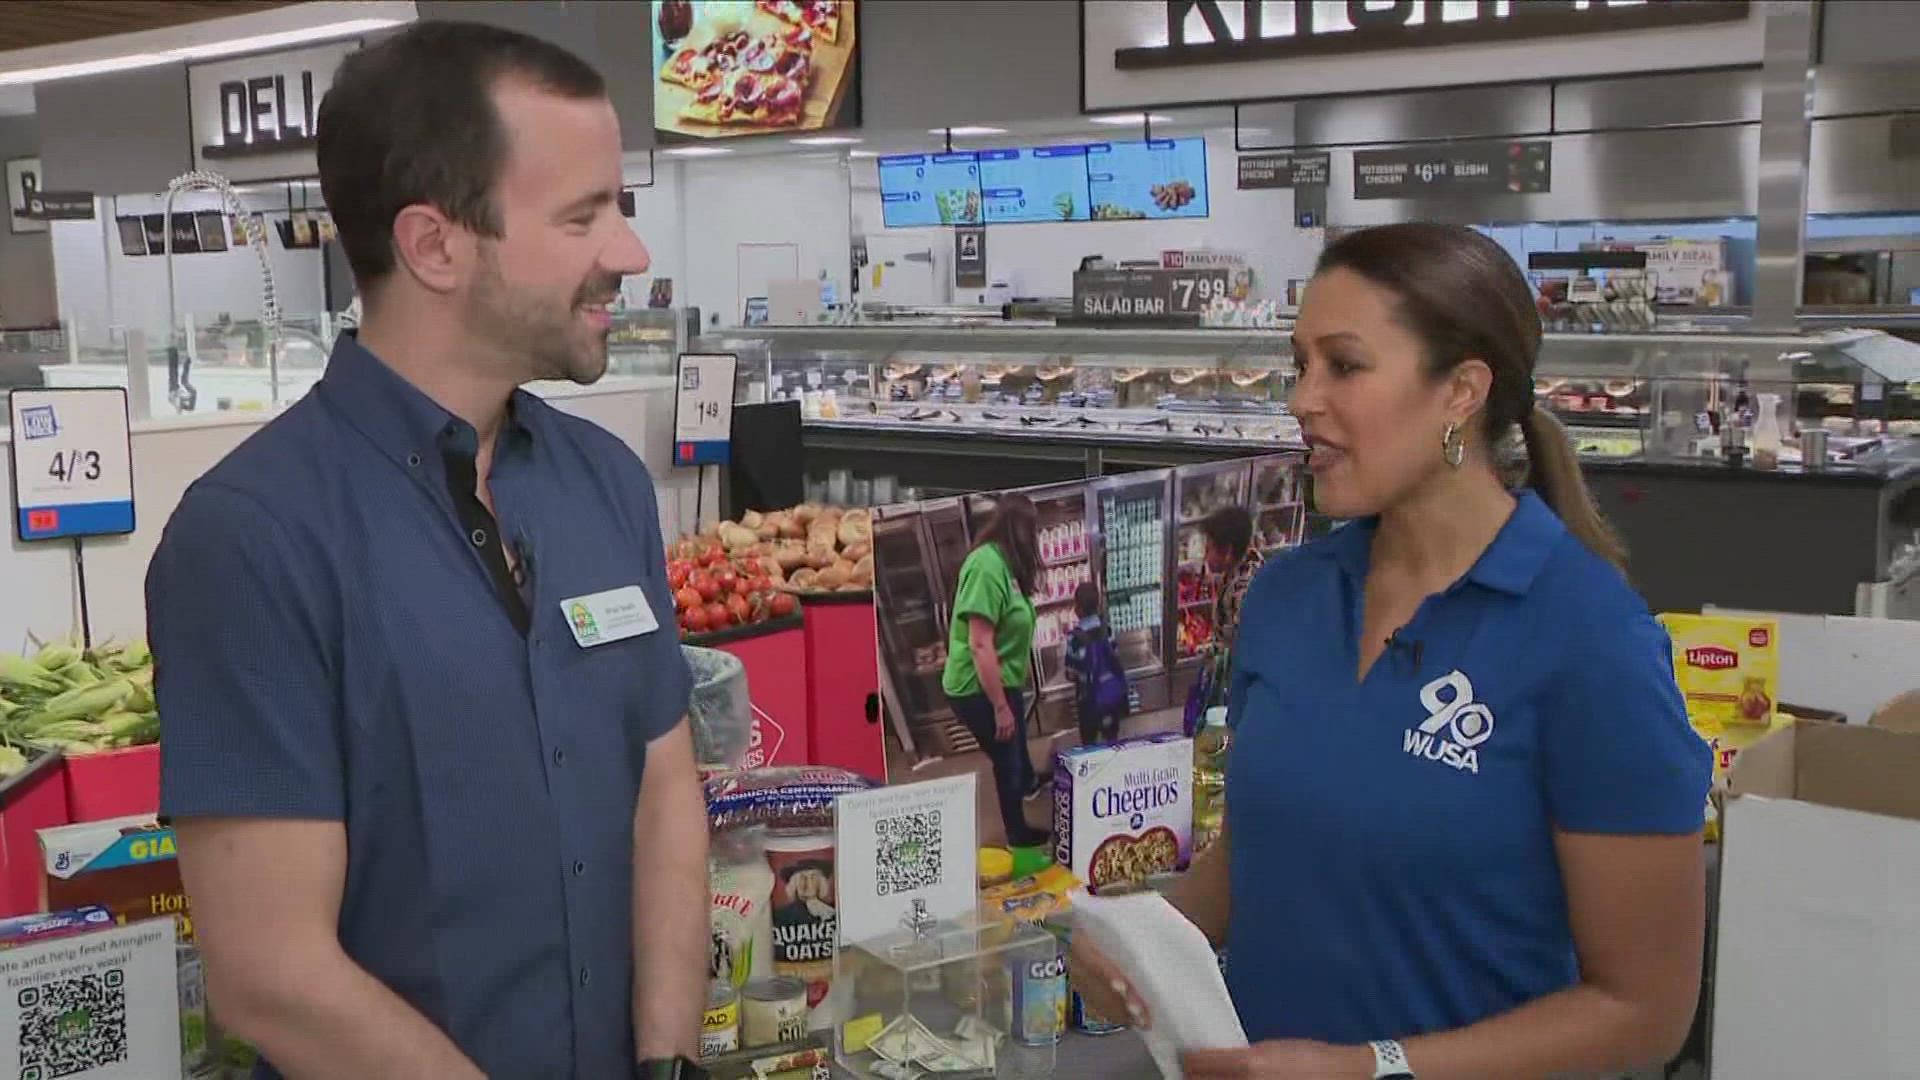 Lesli Foster is live at the Giant in 'Seven Corners Center' in Falls Church to talk more about how we're making that impact, and the groups that are helping us